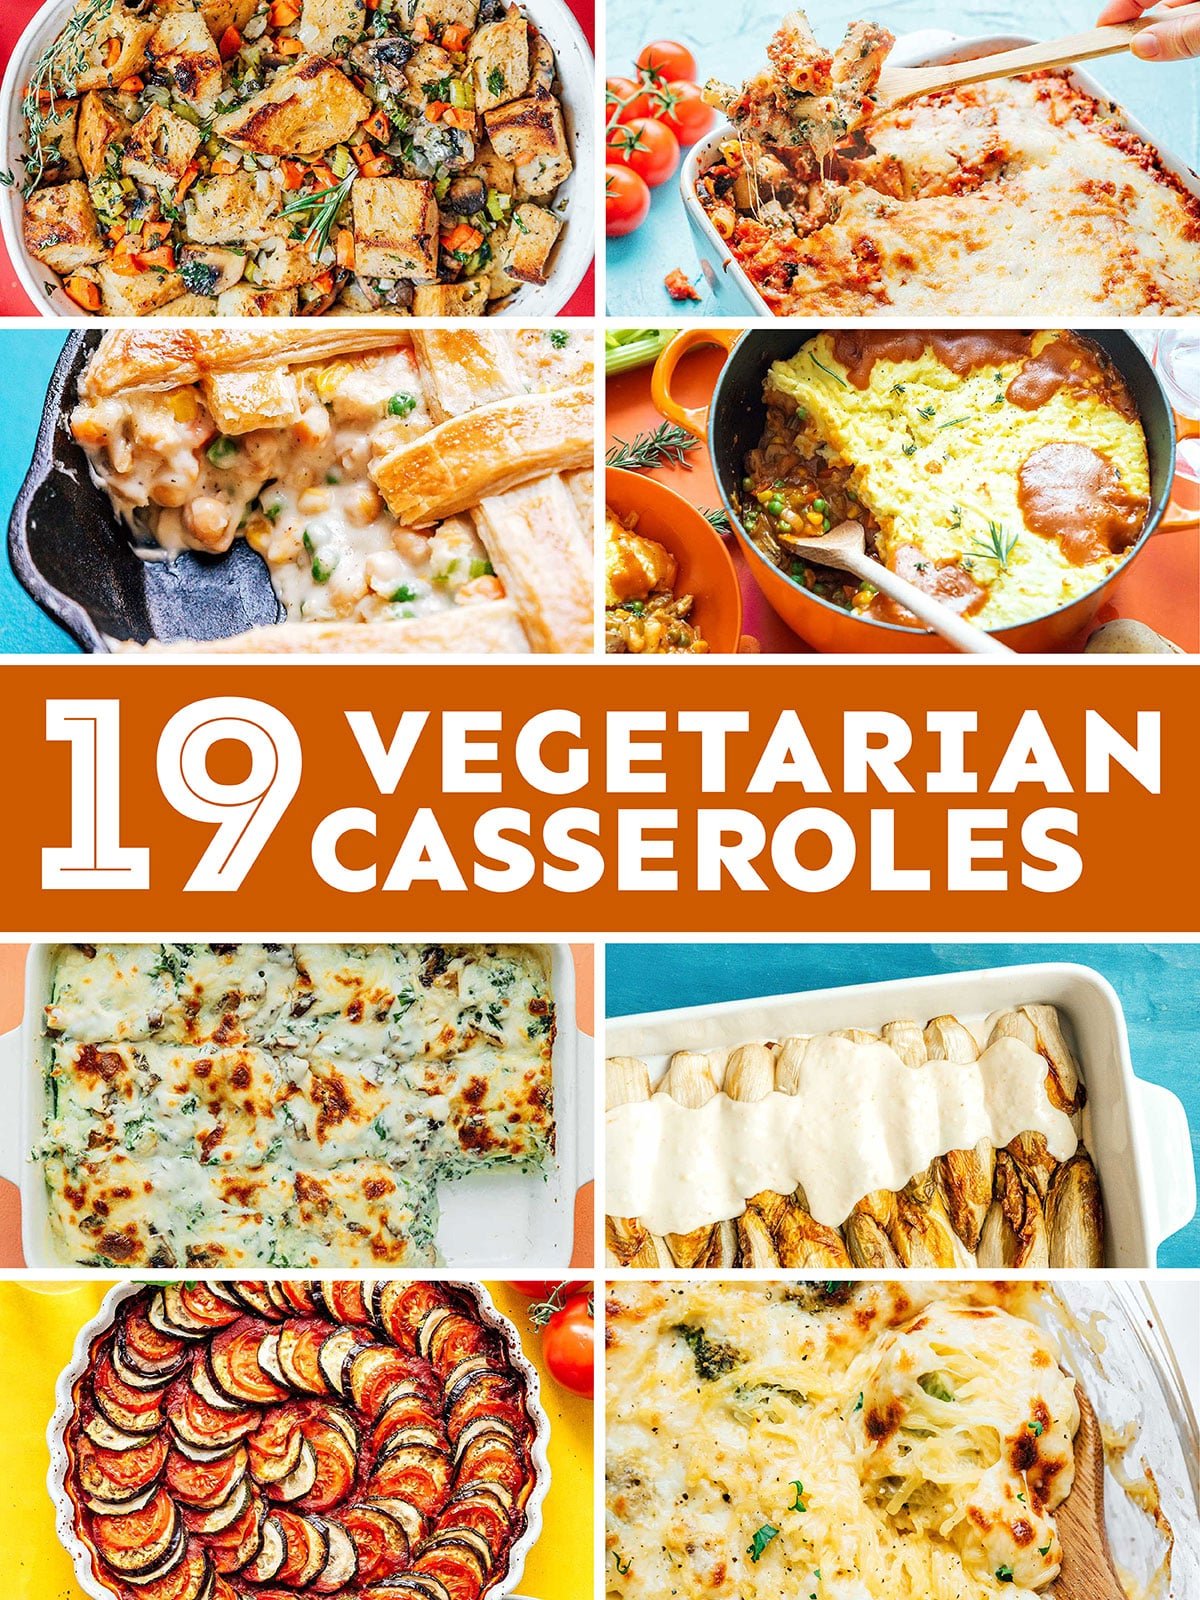 Collage that says "19 vegetarian casseroles".